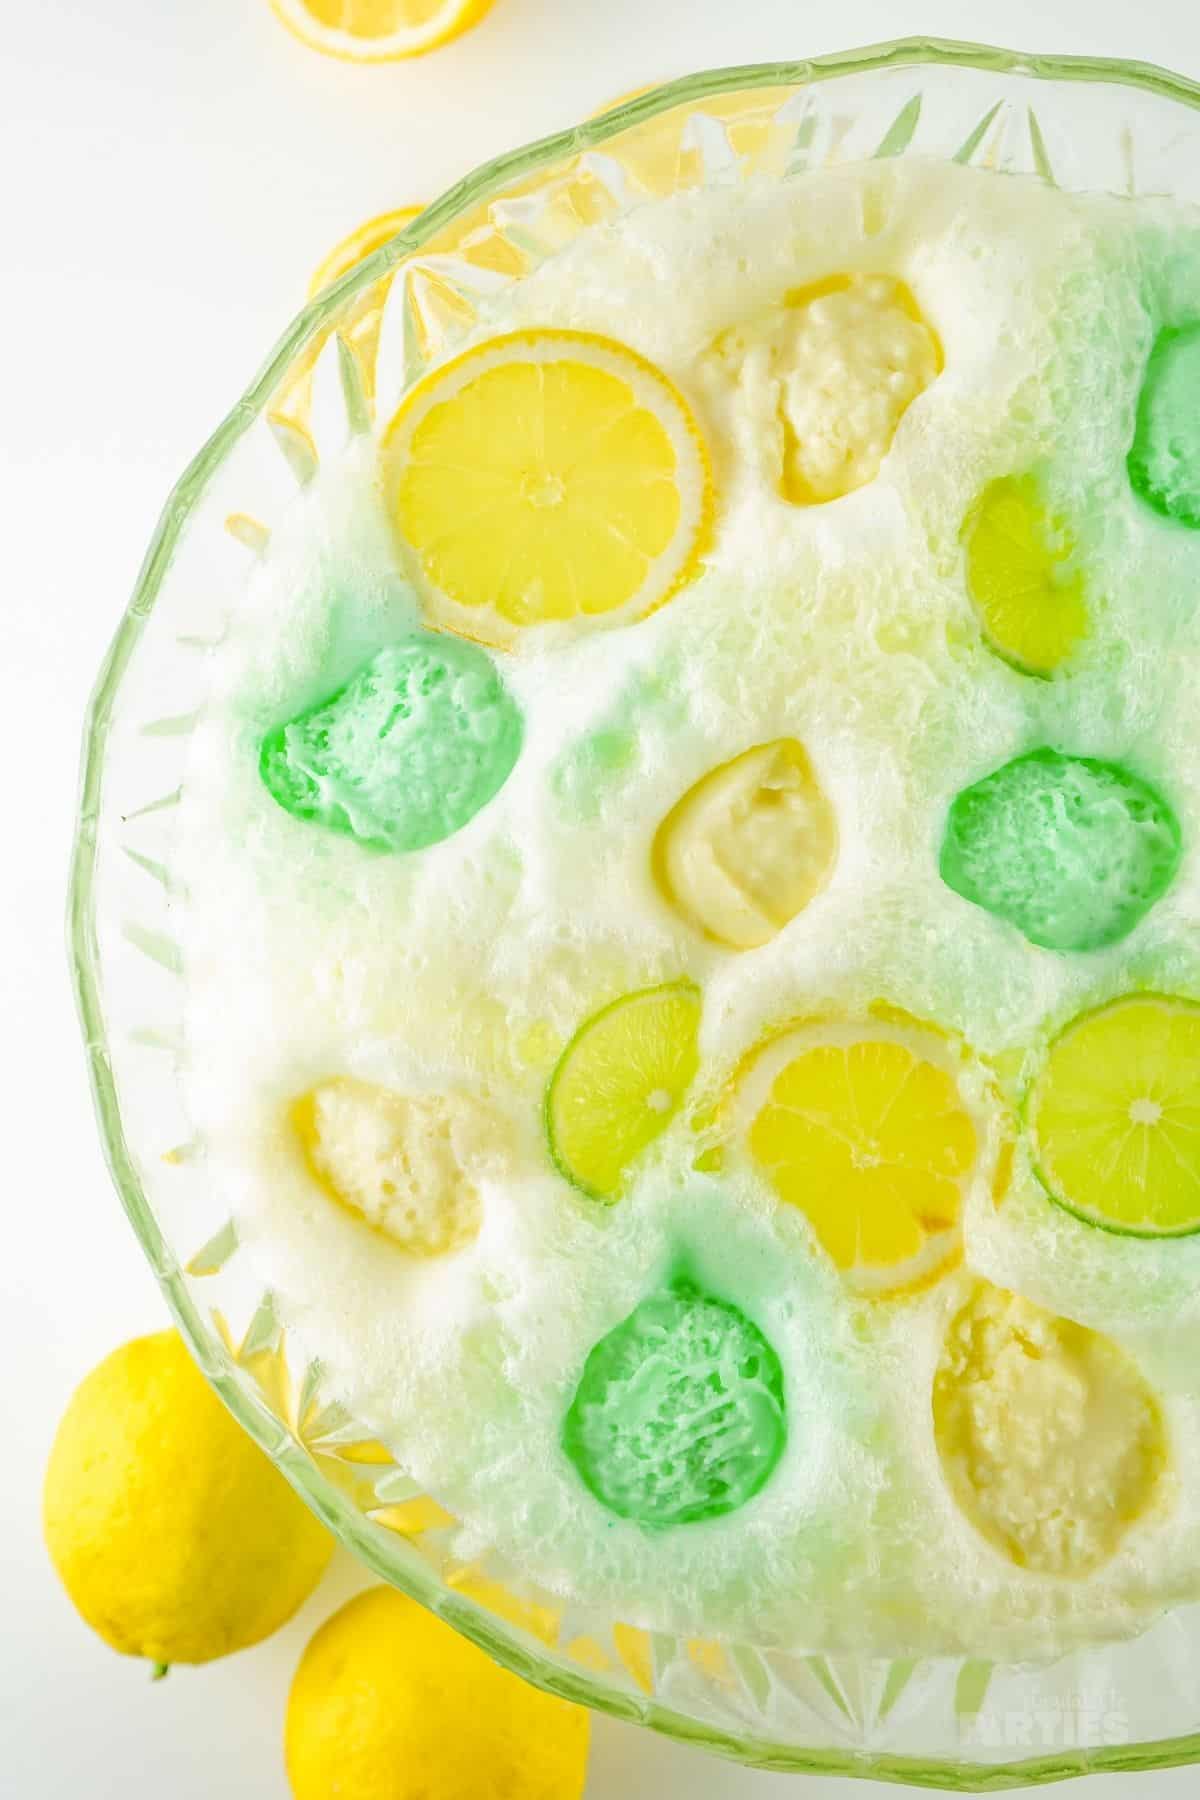 From the top you can see the dollops of foamy yellow and green sherbet - perfect for gender neutral baby showers.